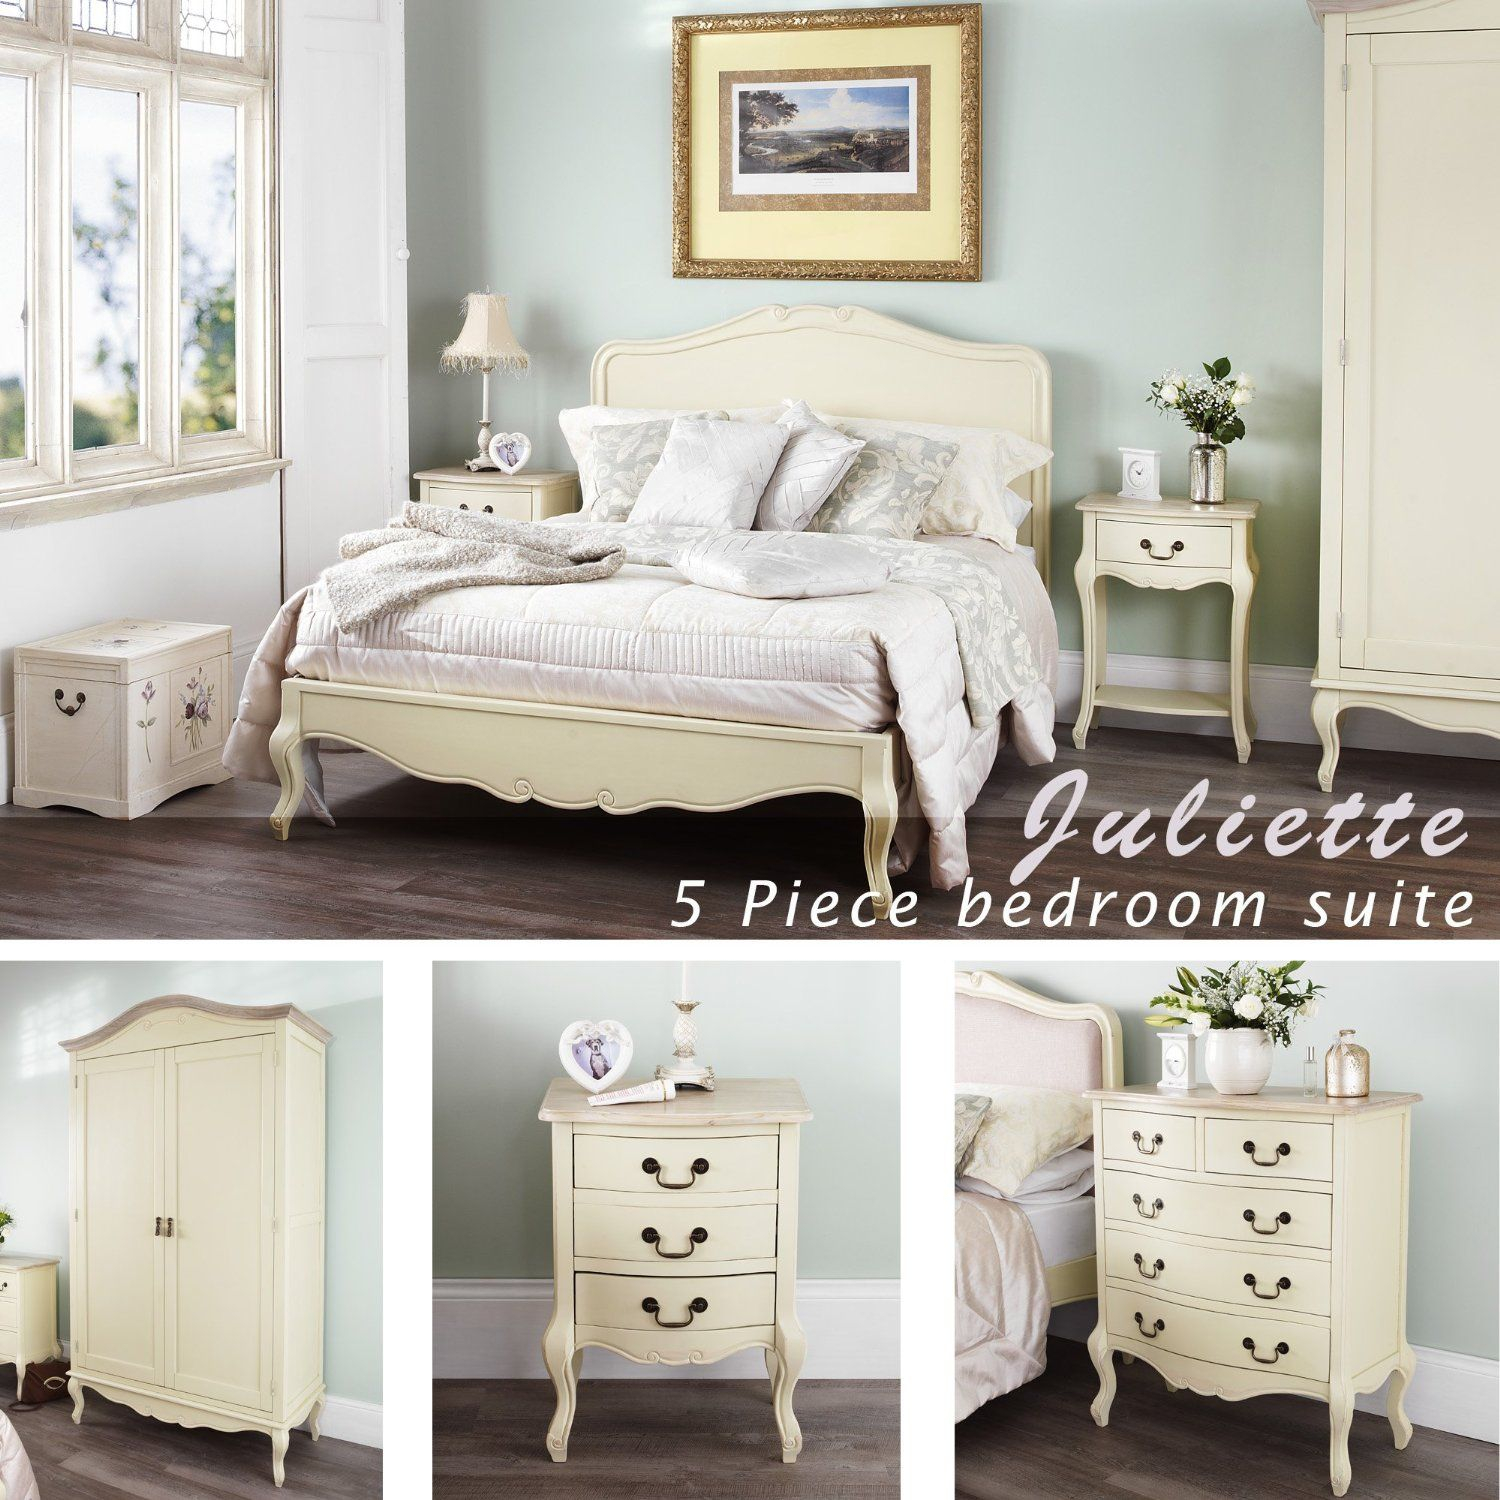 Gorgeous Juliette Shab Chic Champagne 5pc Bedroom Furniture Set in dimensions 1500 X 1500